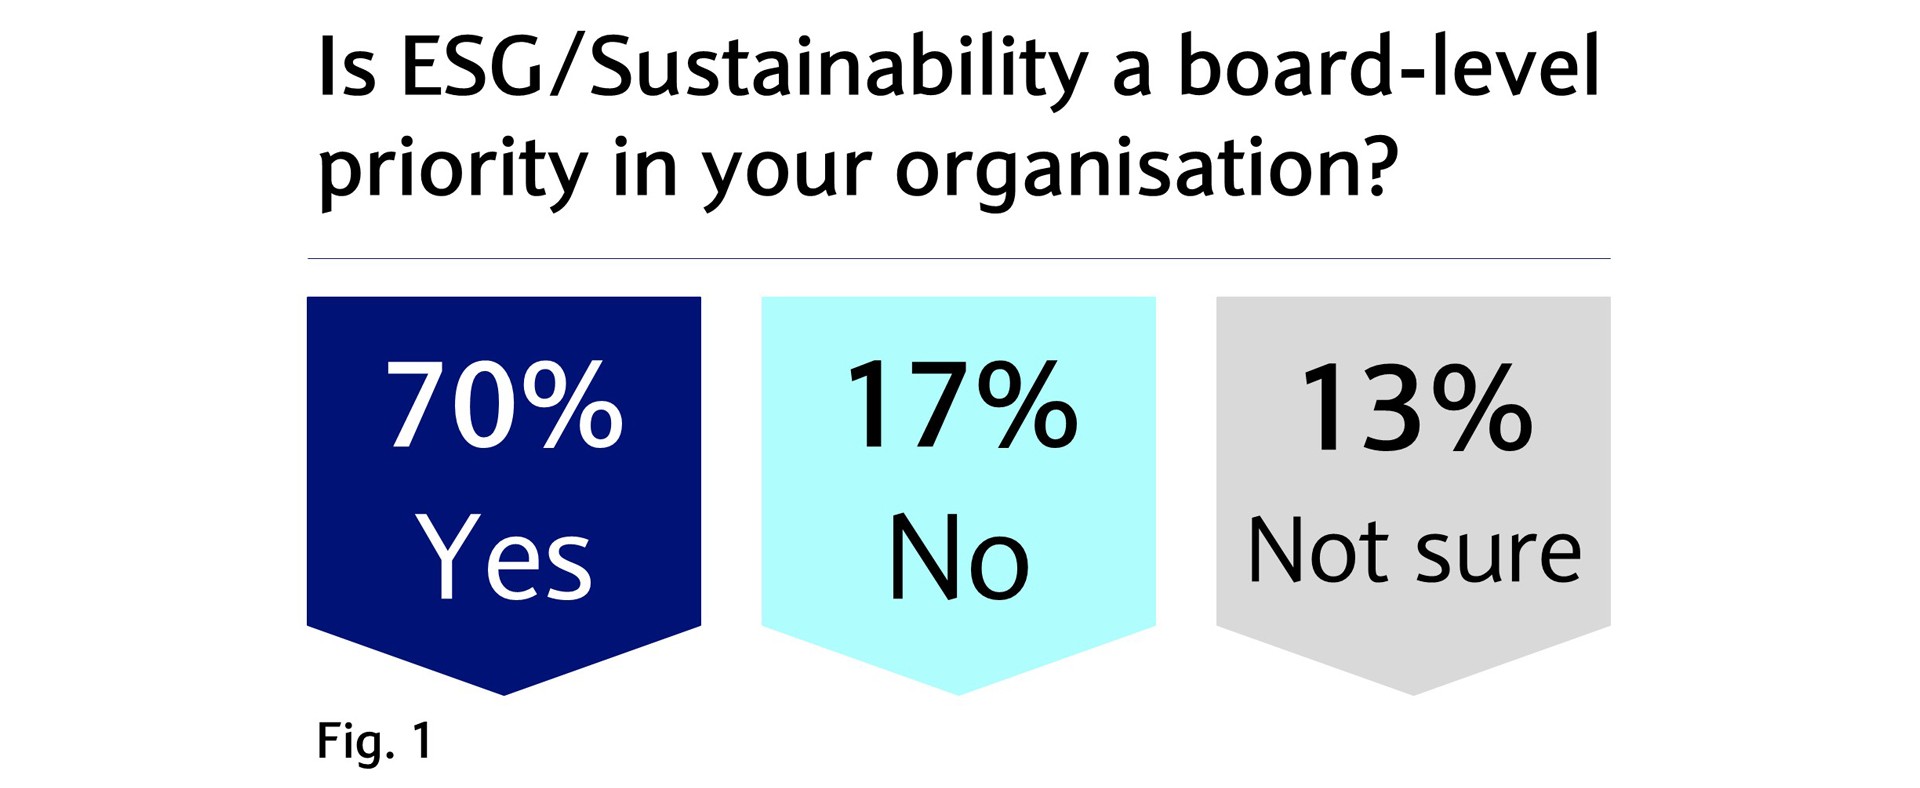 Is ESG/ Sustainability a board-level priority in your organisation:
70% Yes, 17% No, 13% Not sure.